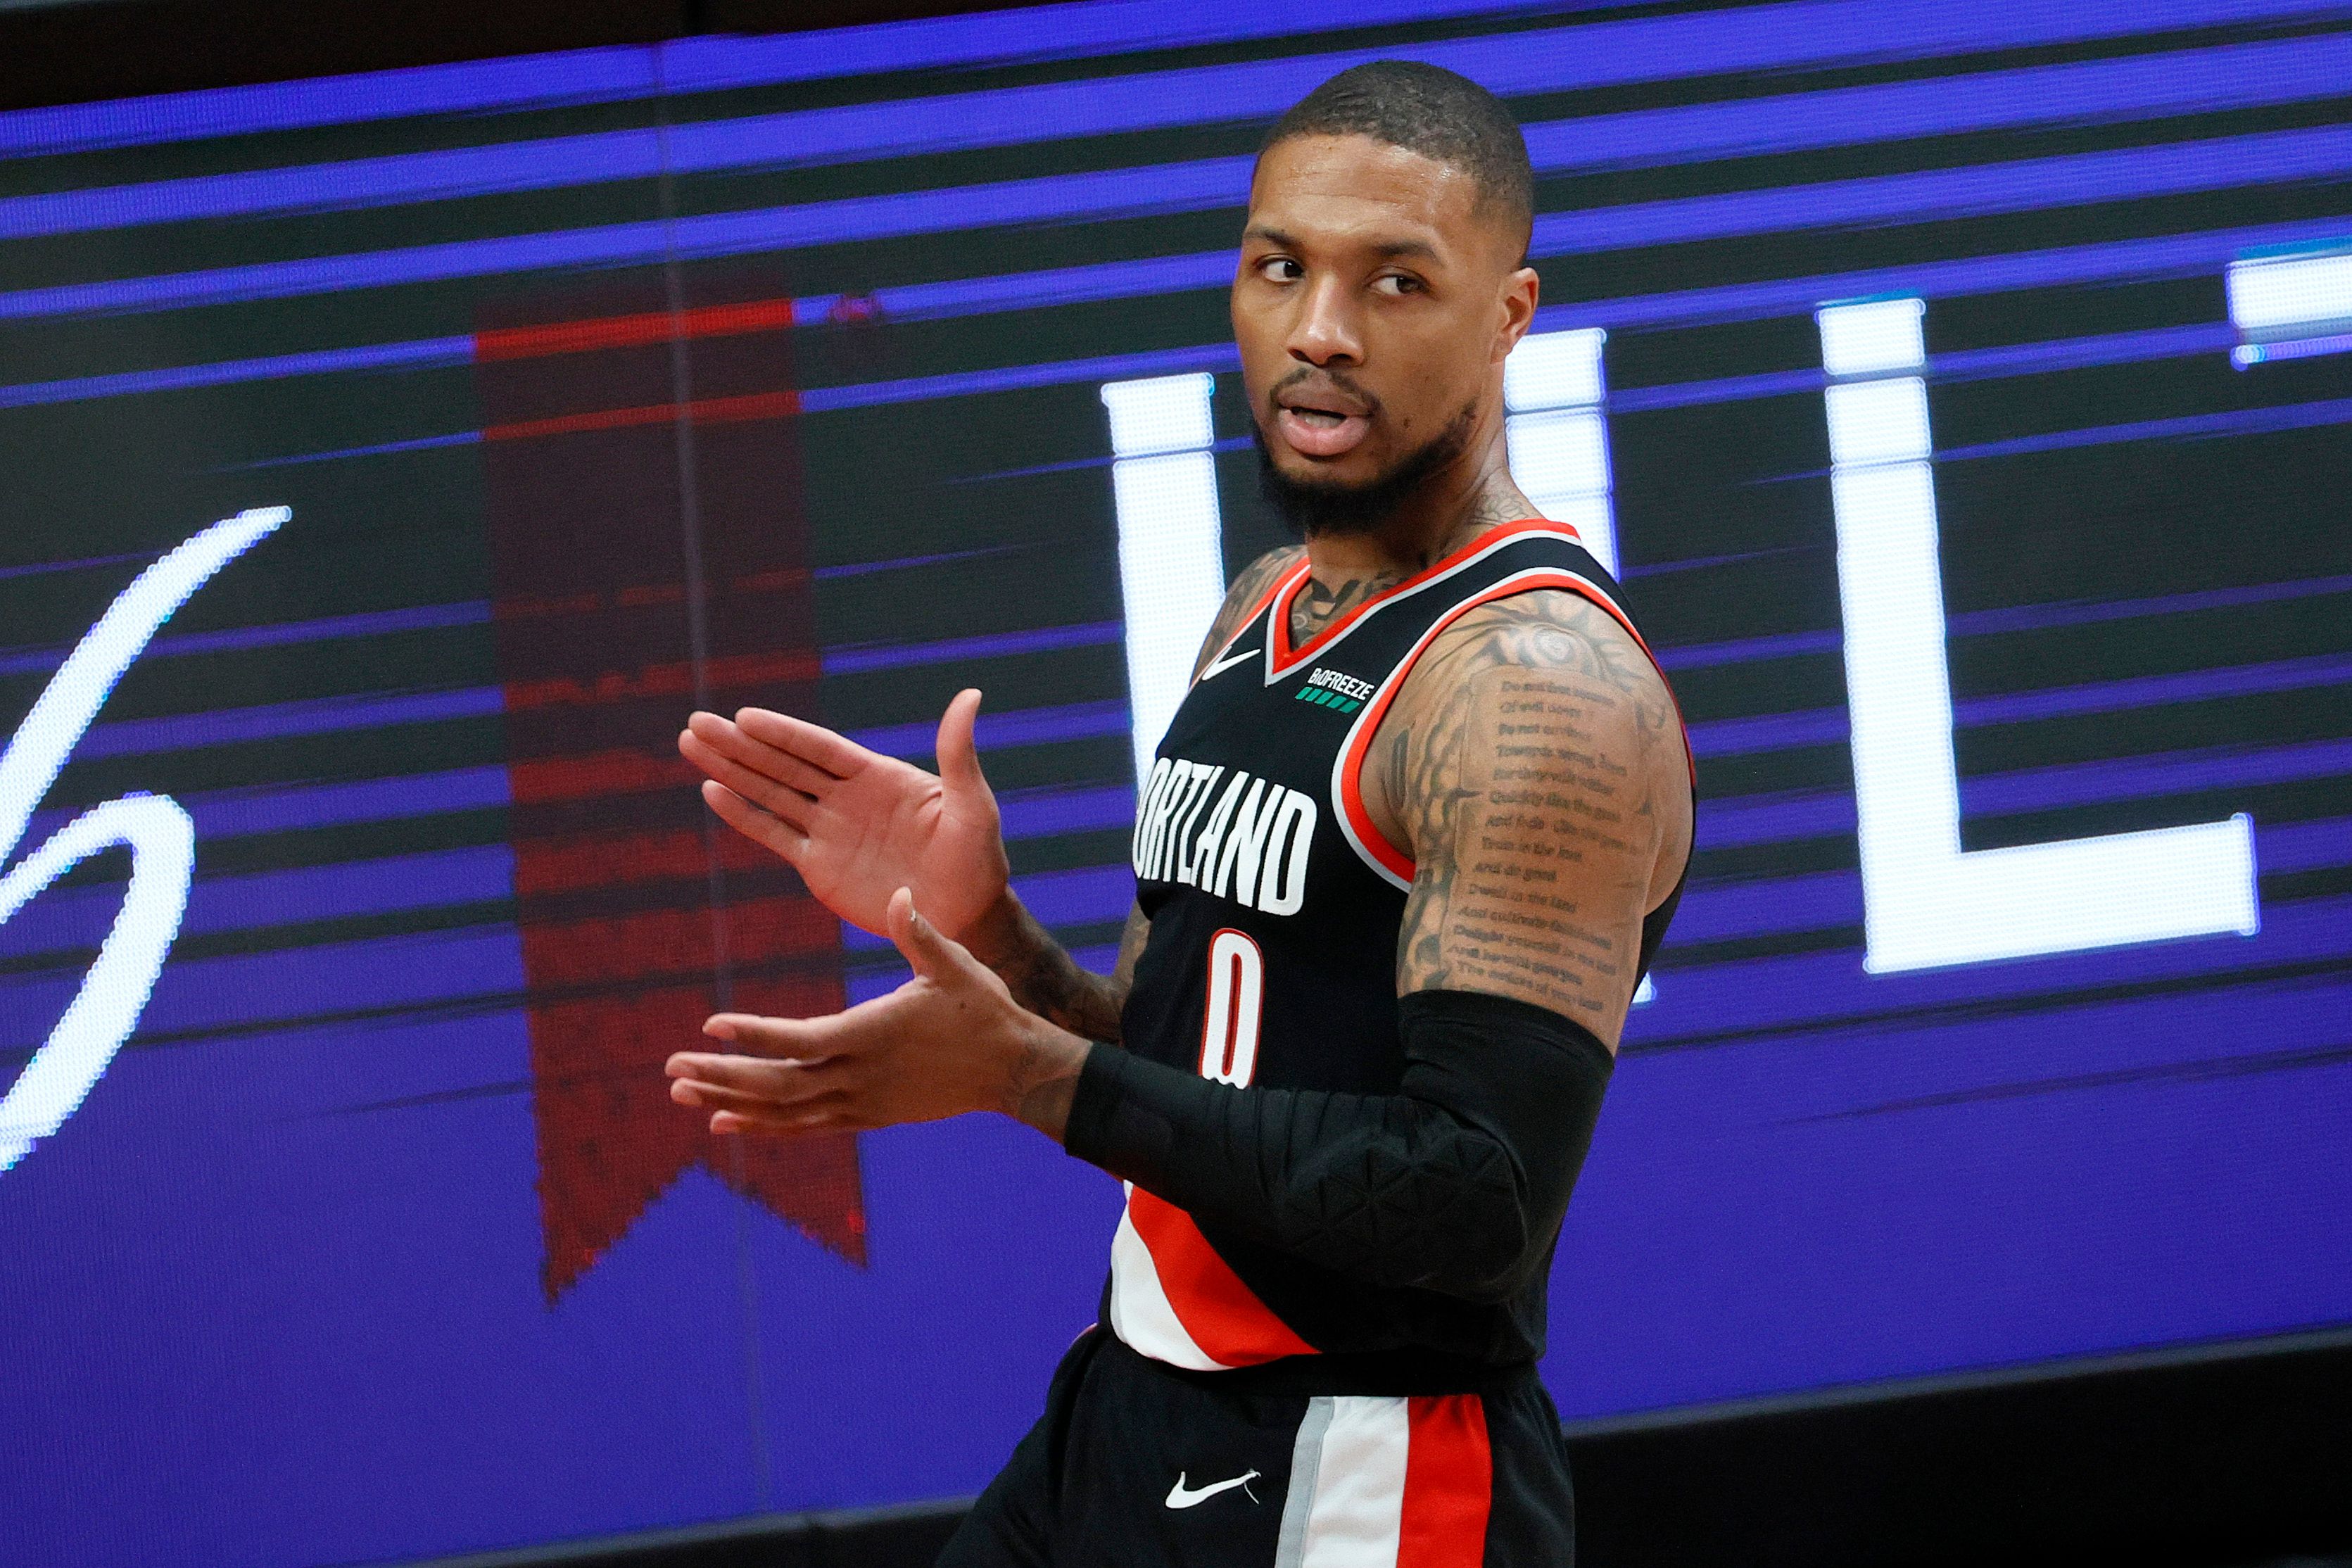 Damian Lillard clapping after getting a favorable call from the ref